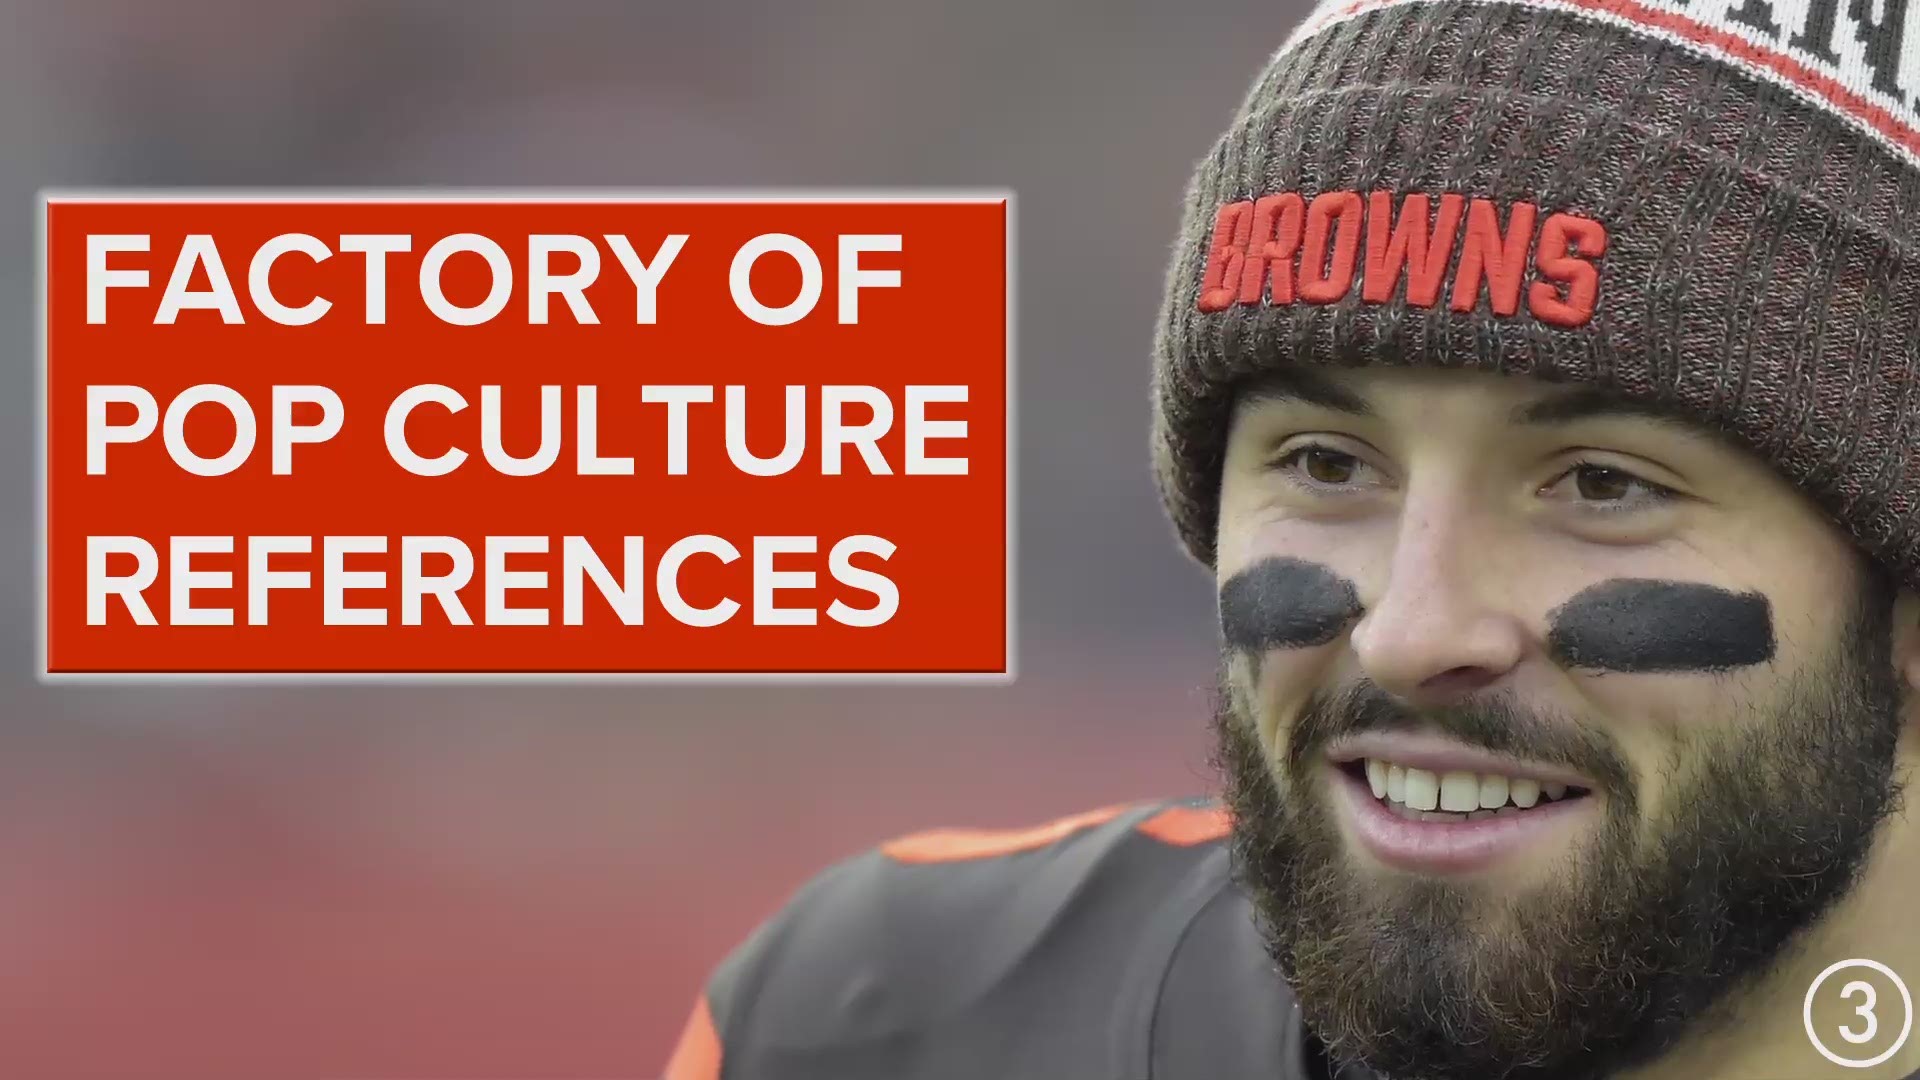 As you may have noticed, Baker Mayfield has taken a unique approach to his press conferences this season.